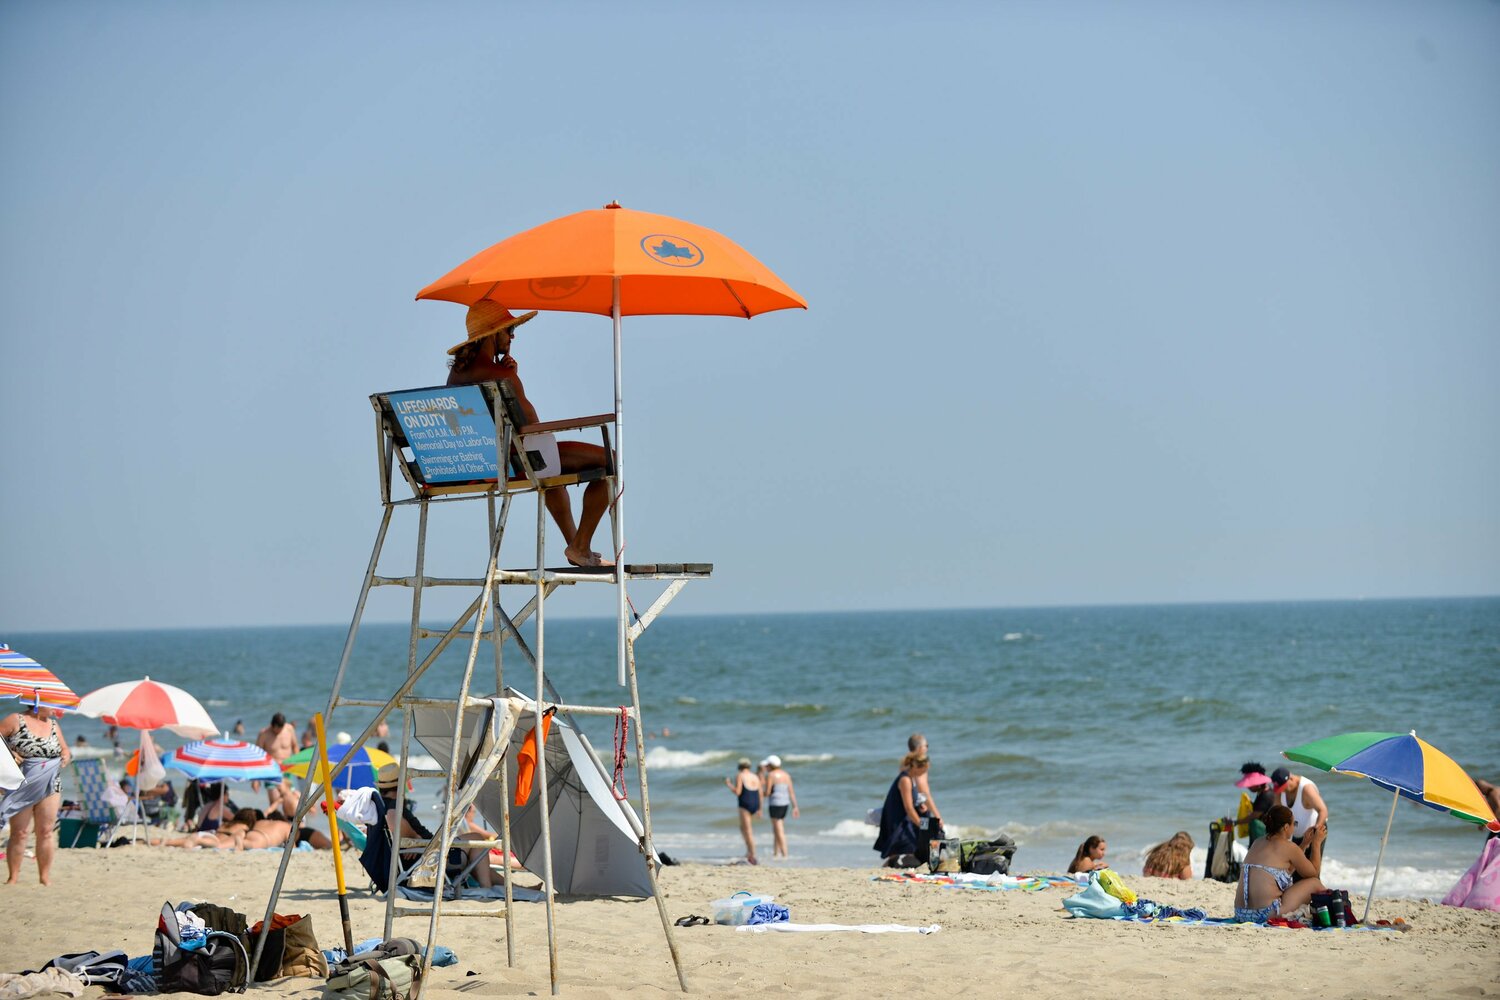 To address a shortage of qualified candidates, the city has raised the hourly wage of new lifeguards from $16 to $19. But the pay boost is good for this summer only.